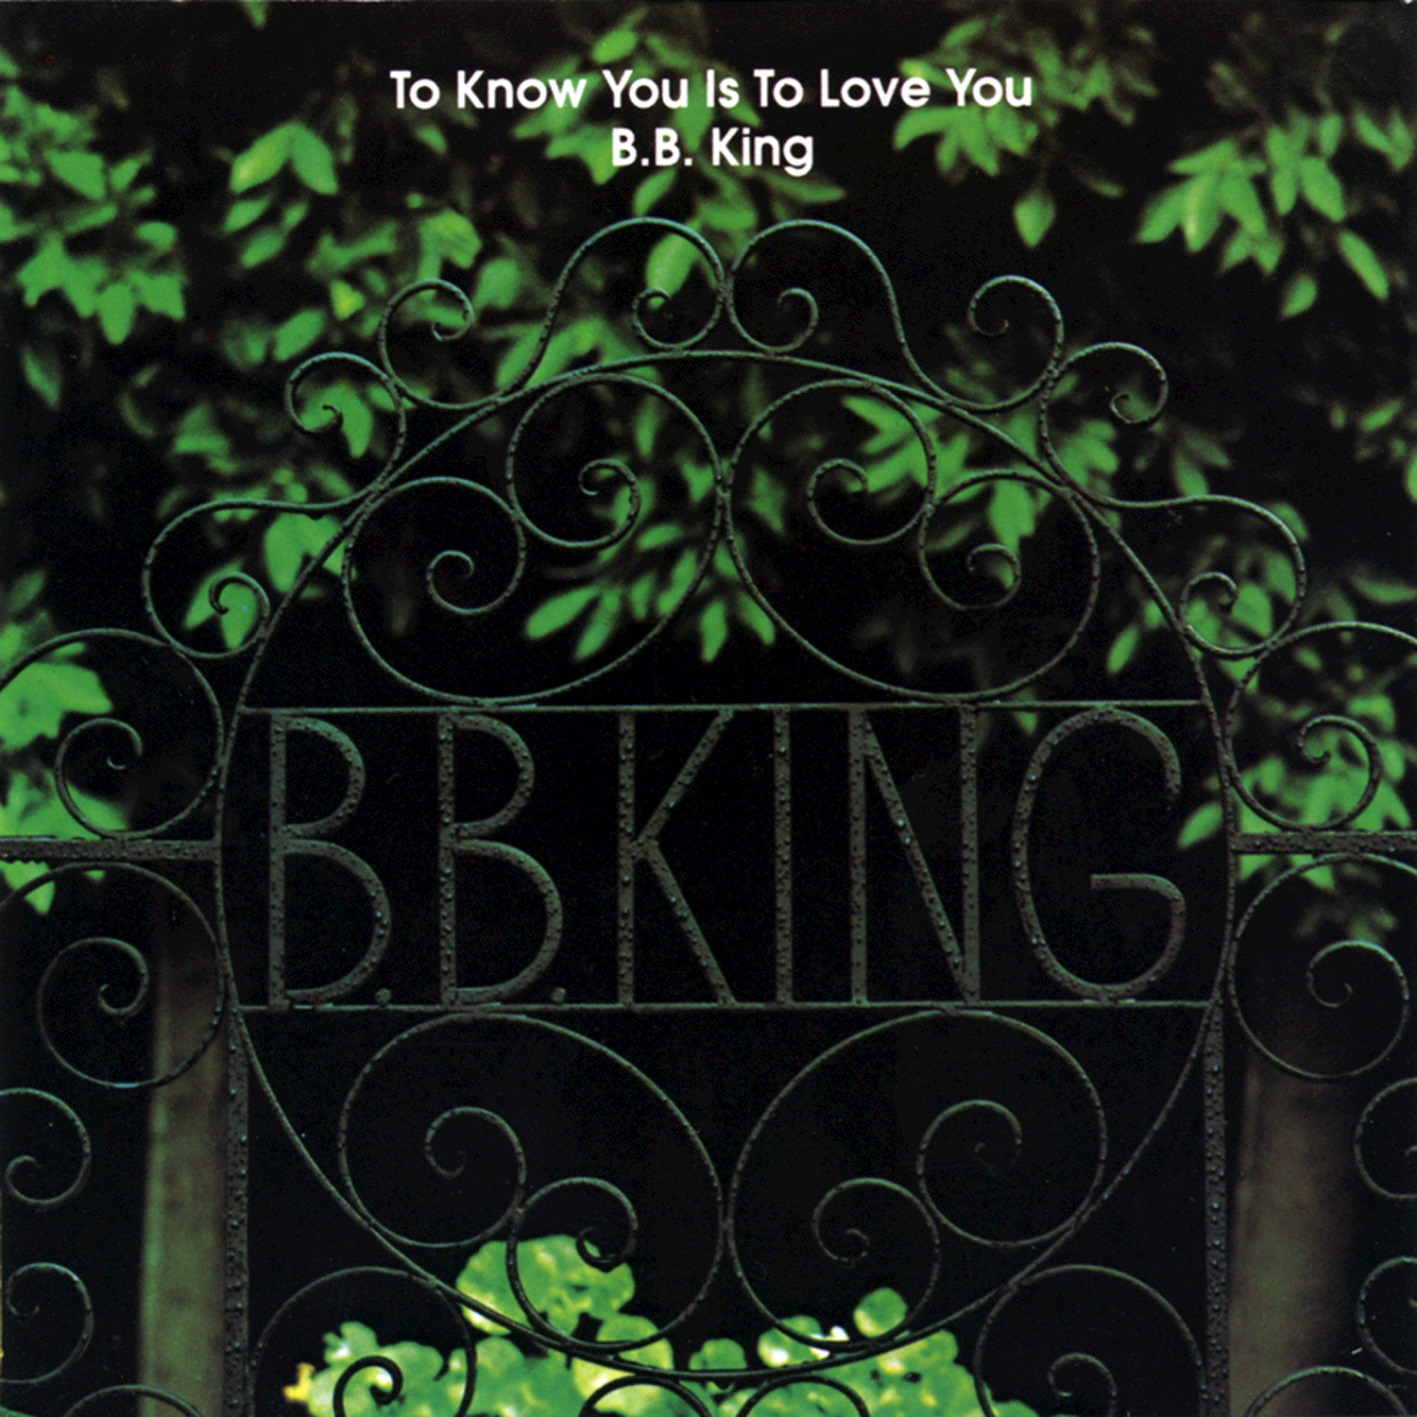 B.B. King - To Know You Is To Love You (1973/2015) [HDTracks FLAC 24bit/192kHz]